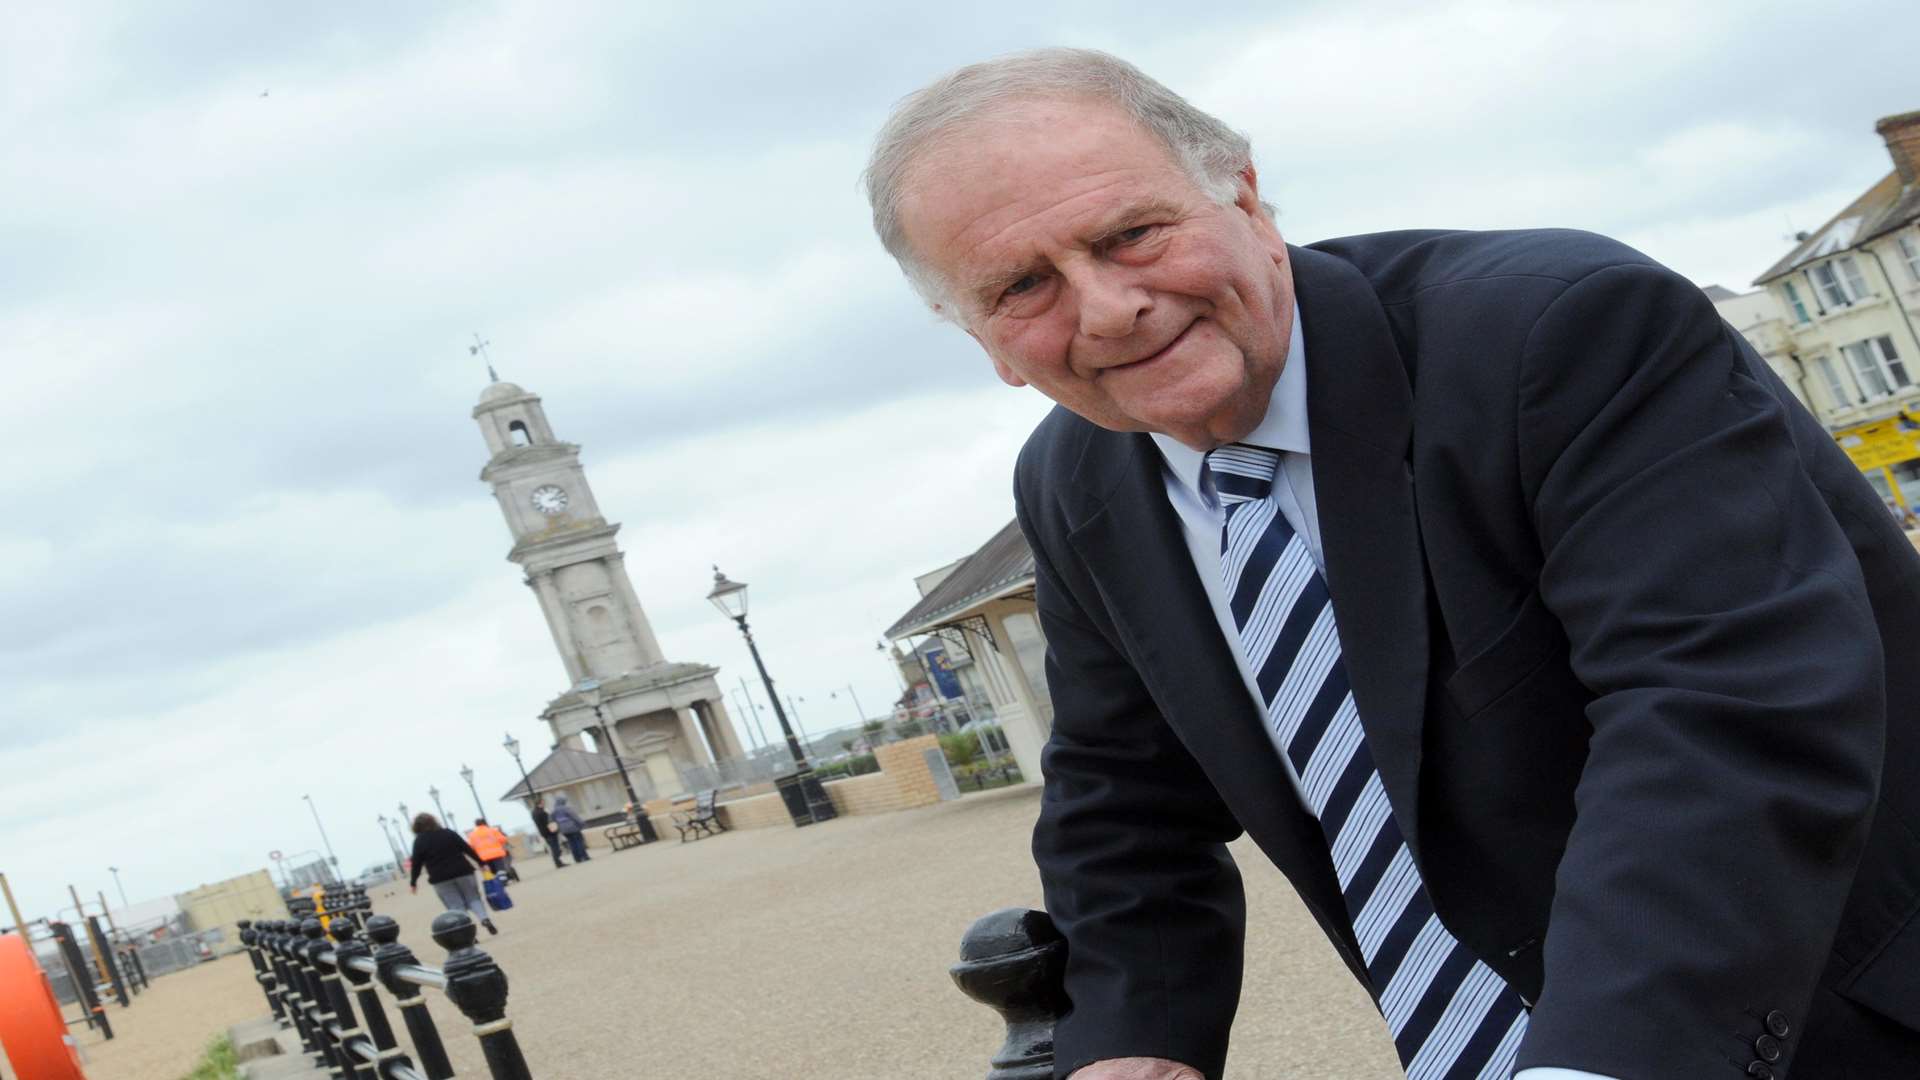 Parliamentary candidate for North Thanet Sir Roger Gale